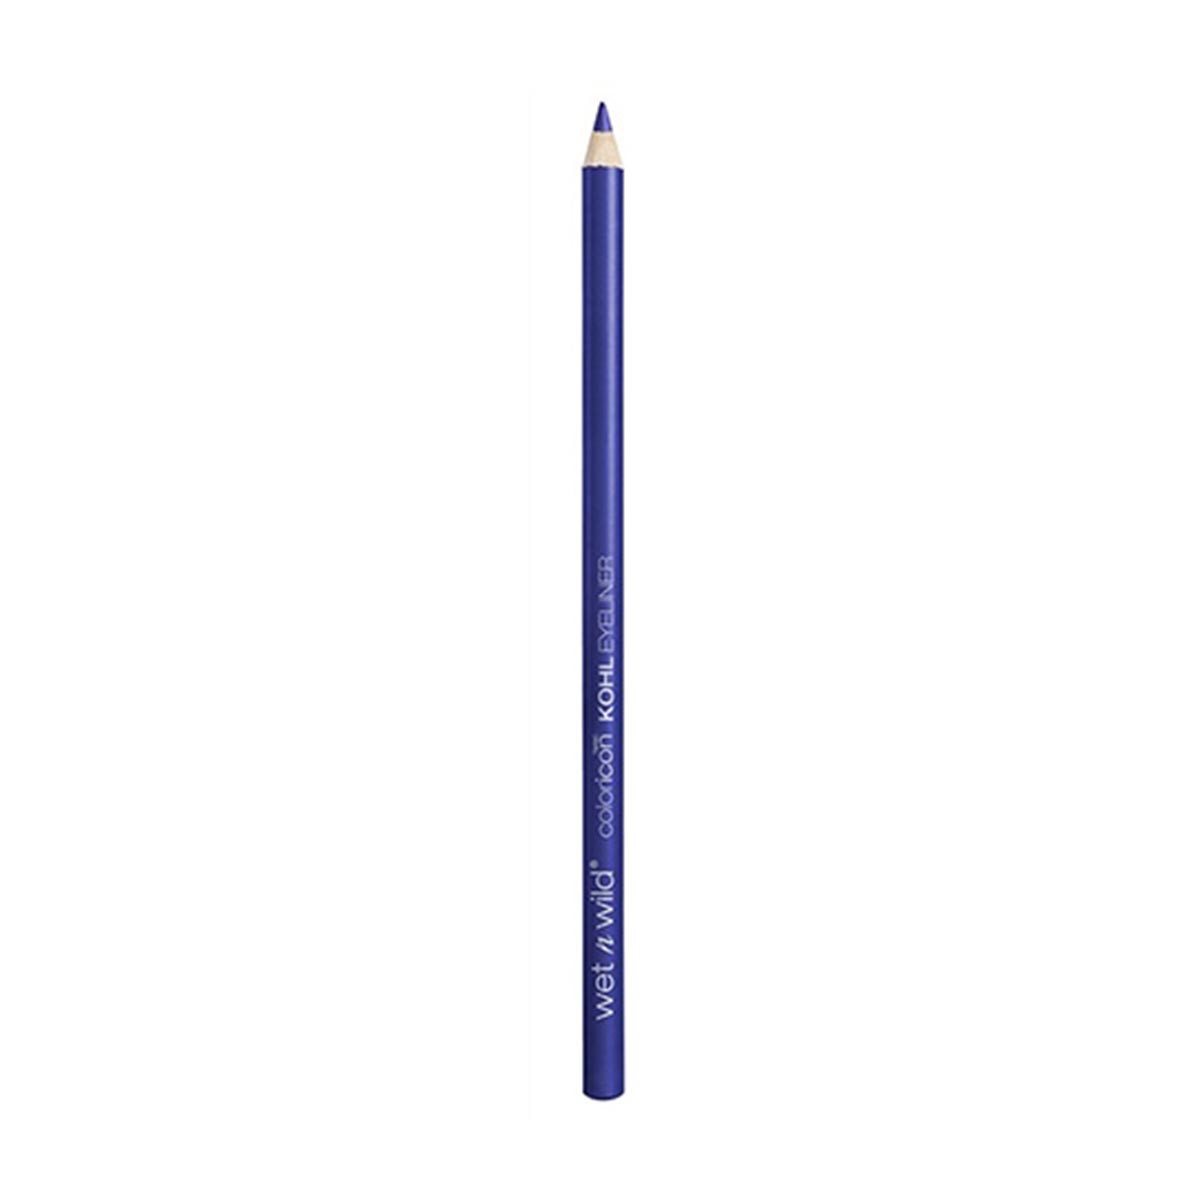 wet-n-wild-coloricon-khol-eyeliner-like-comment-or-share